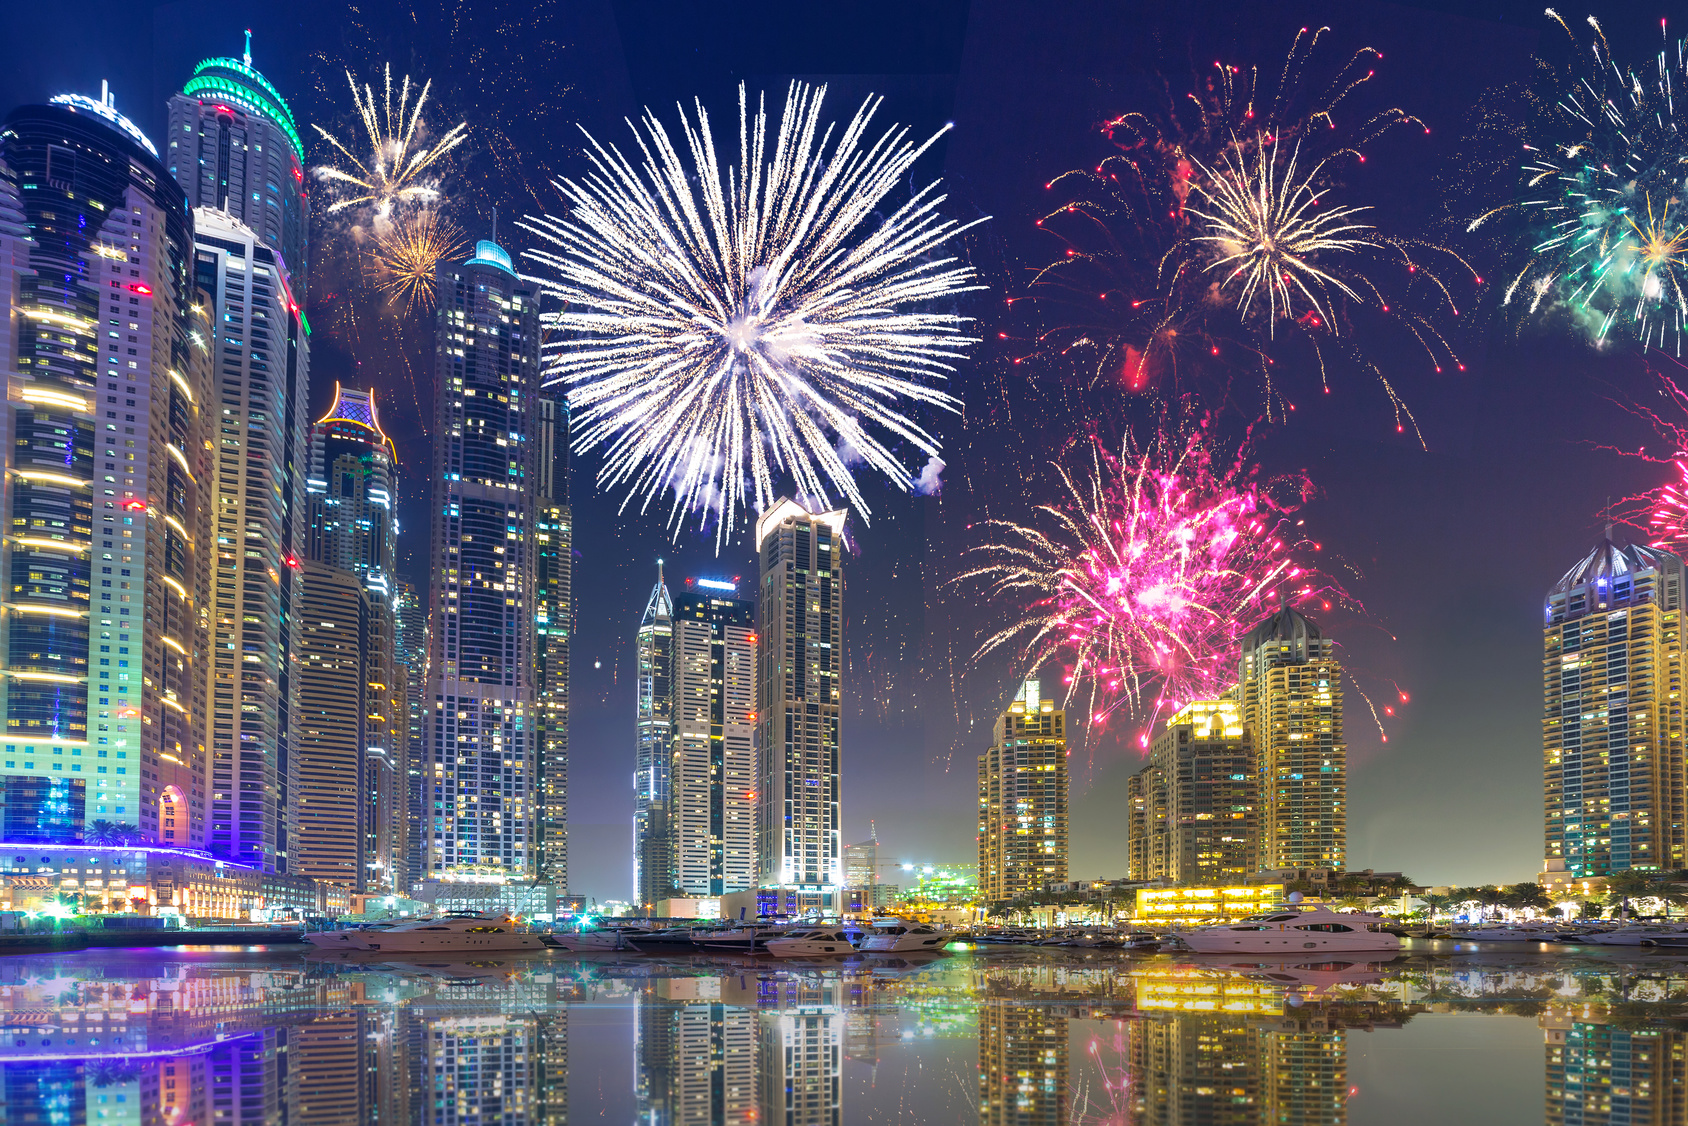 Dubai on New Year's Eve - Best Places to Watch the Fireworks This Year